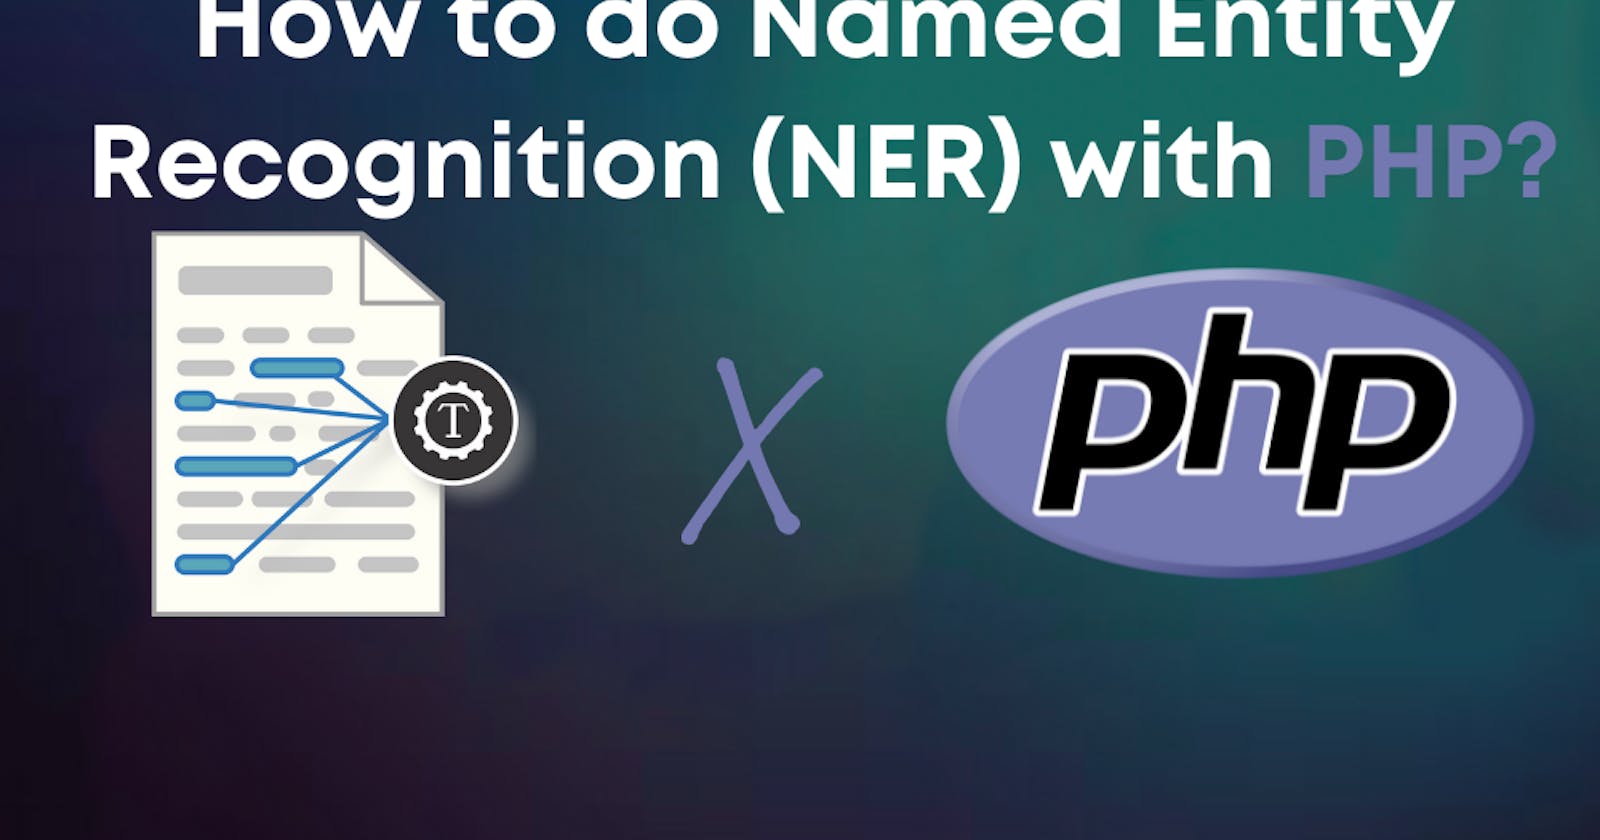 How to do Named Entity Recognition (NER) with PHP?